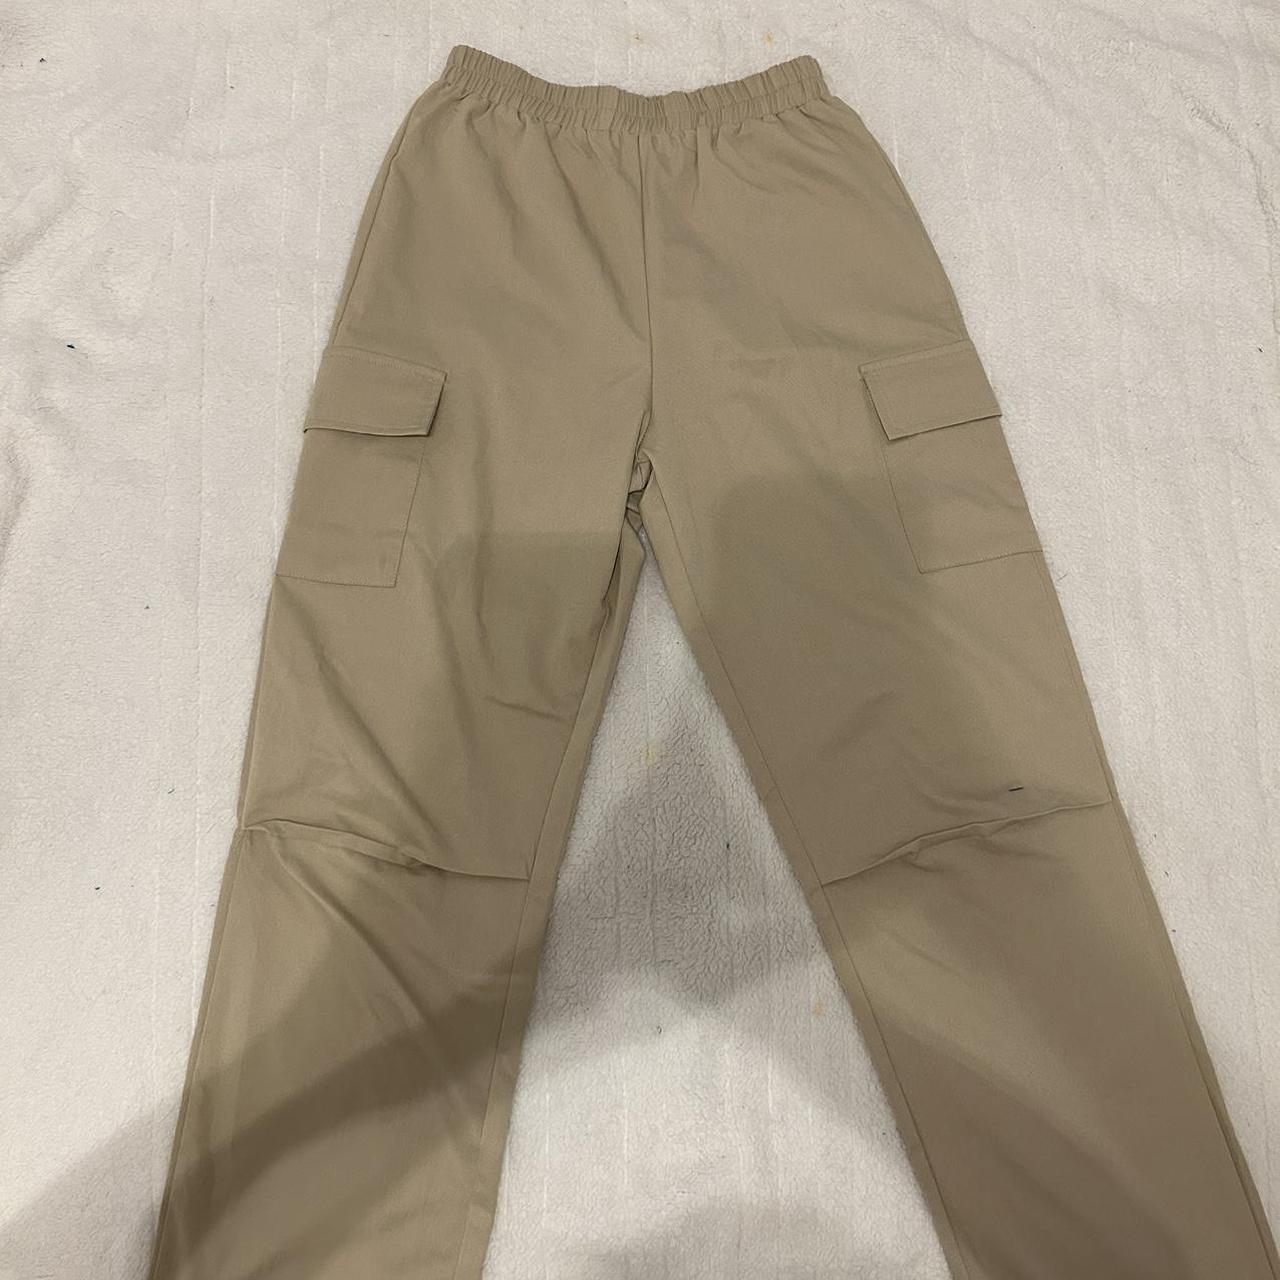 Women's Cream and Tan Trousers | Depop